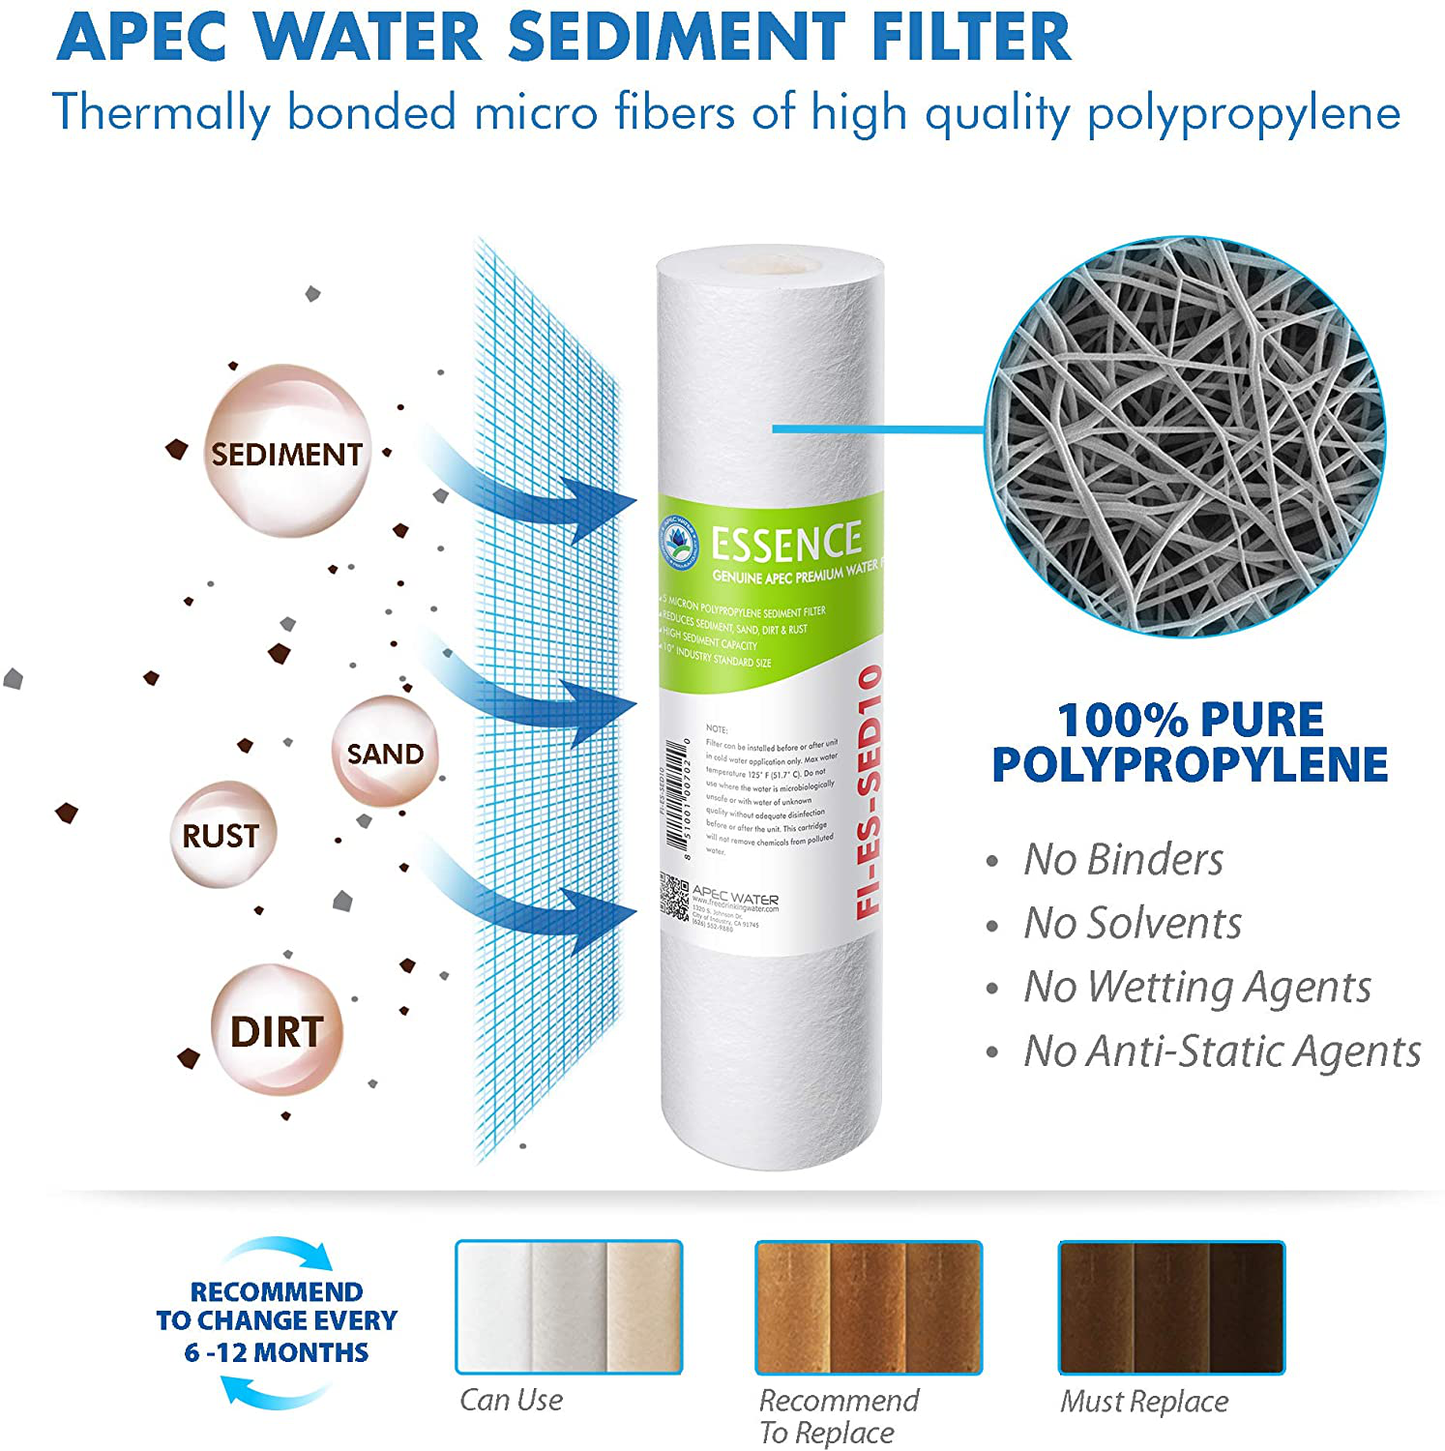 APEC Water Systems FILTER-MAX-ES50 50 GPD High Capacity Complete Replacement Filter Set For Essence Series Reverse Osmosis Water Filter System Stage 1-5